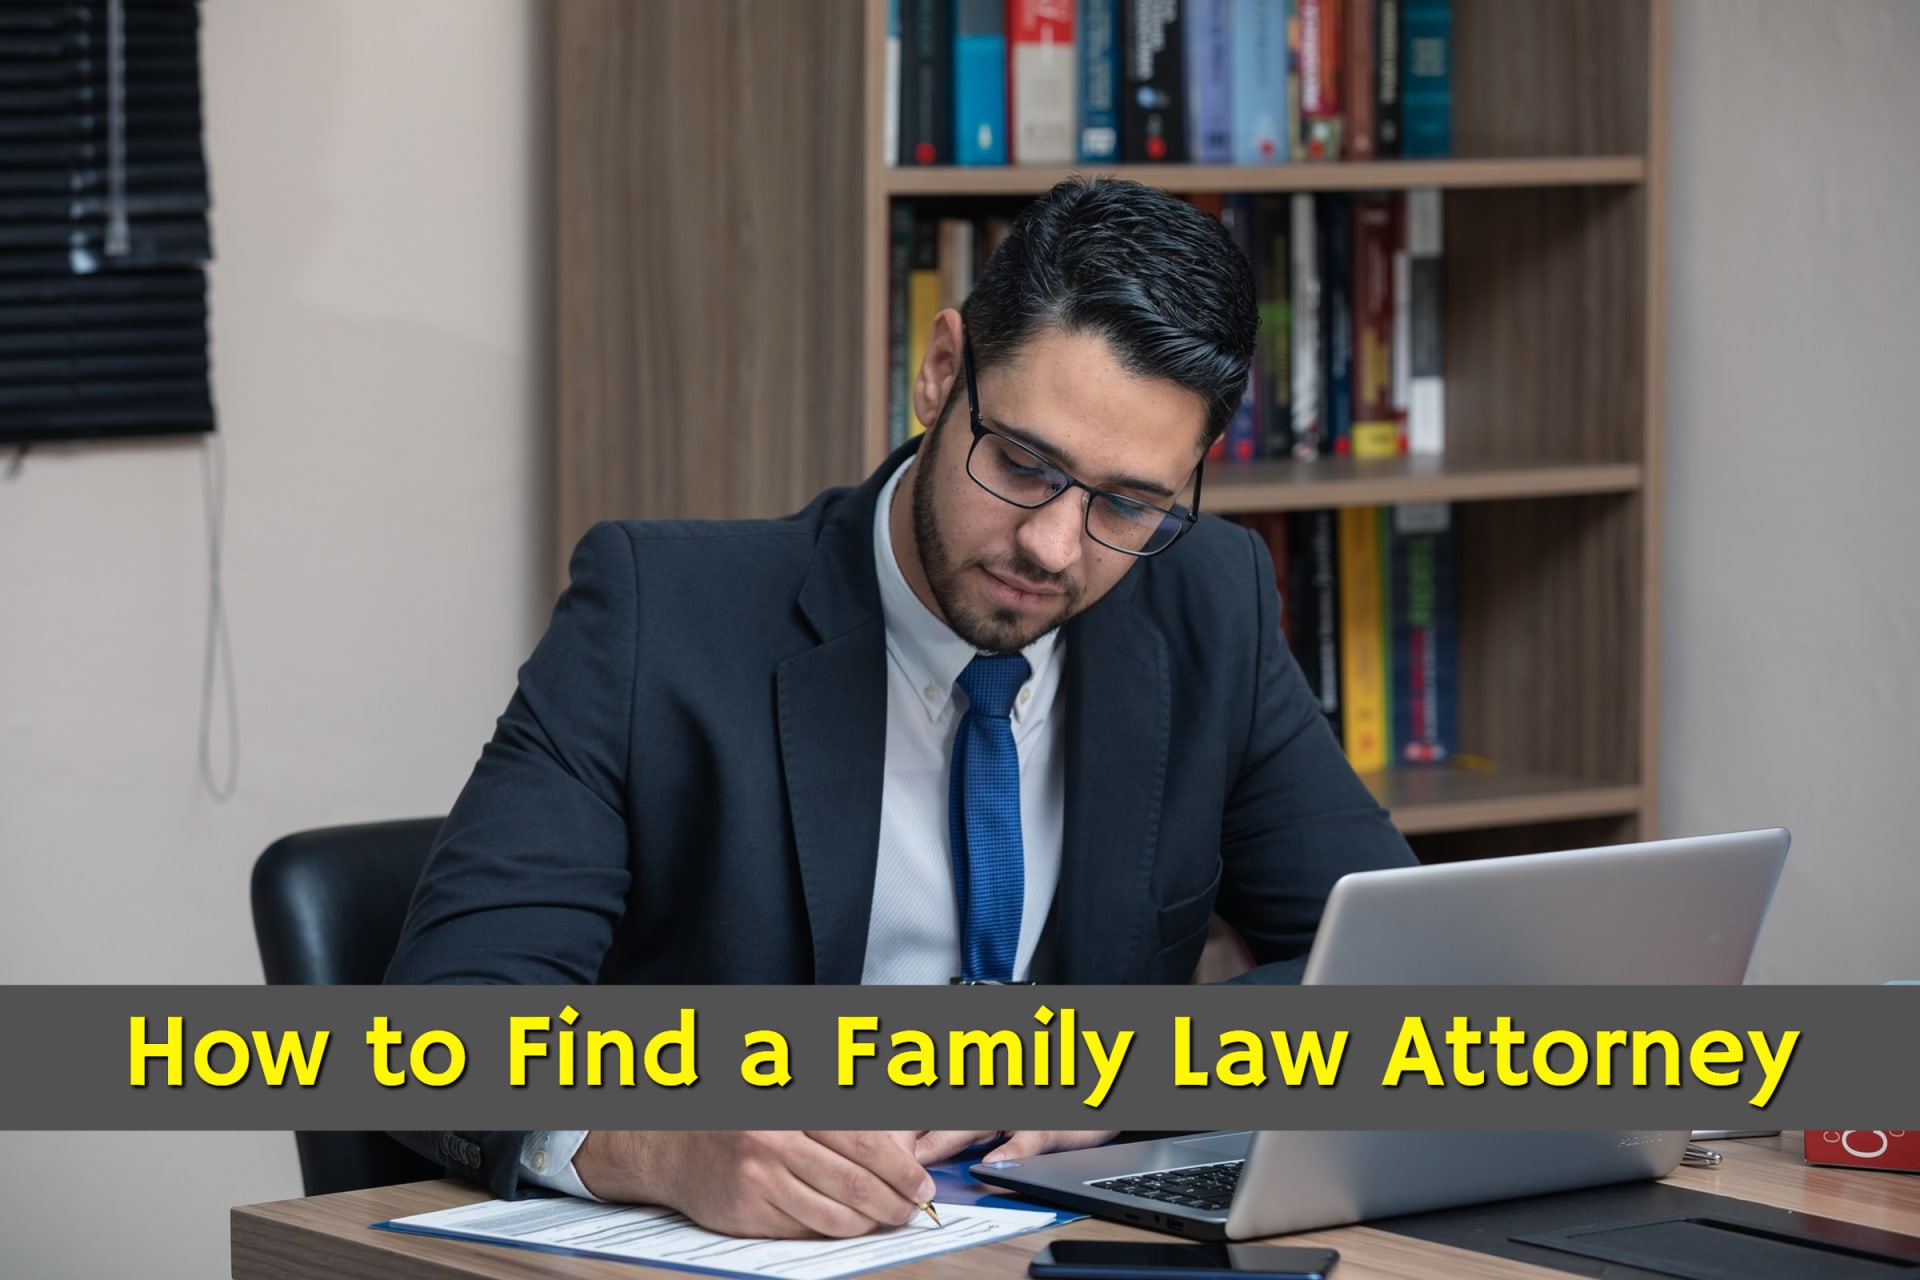 Tips on How to Find a Family Law Attorney